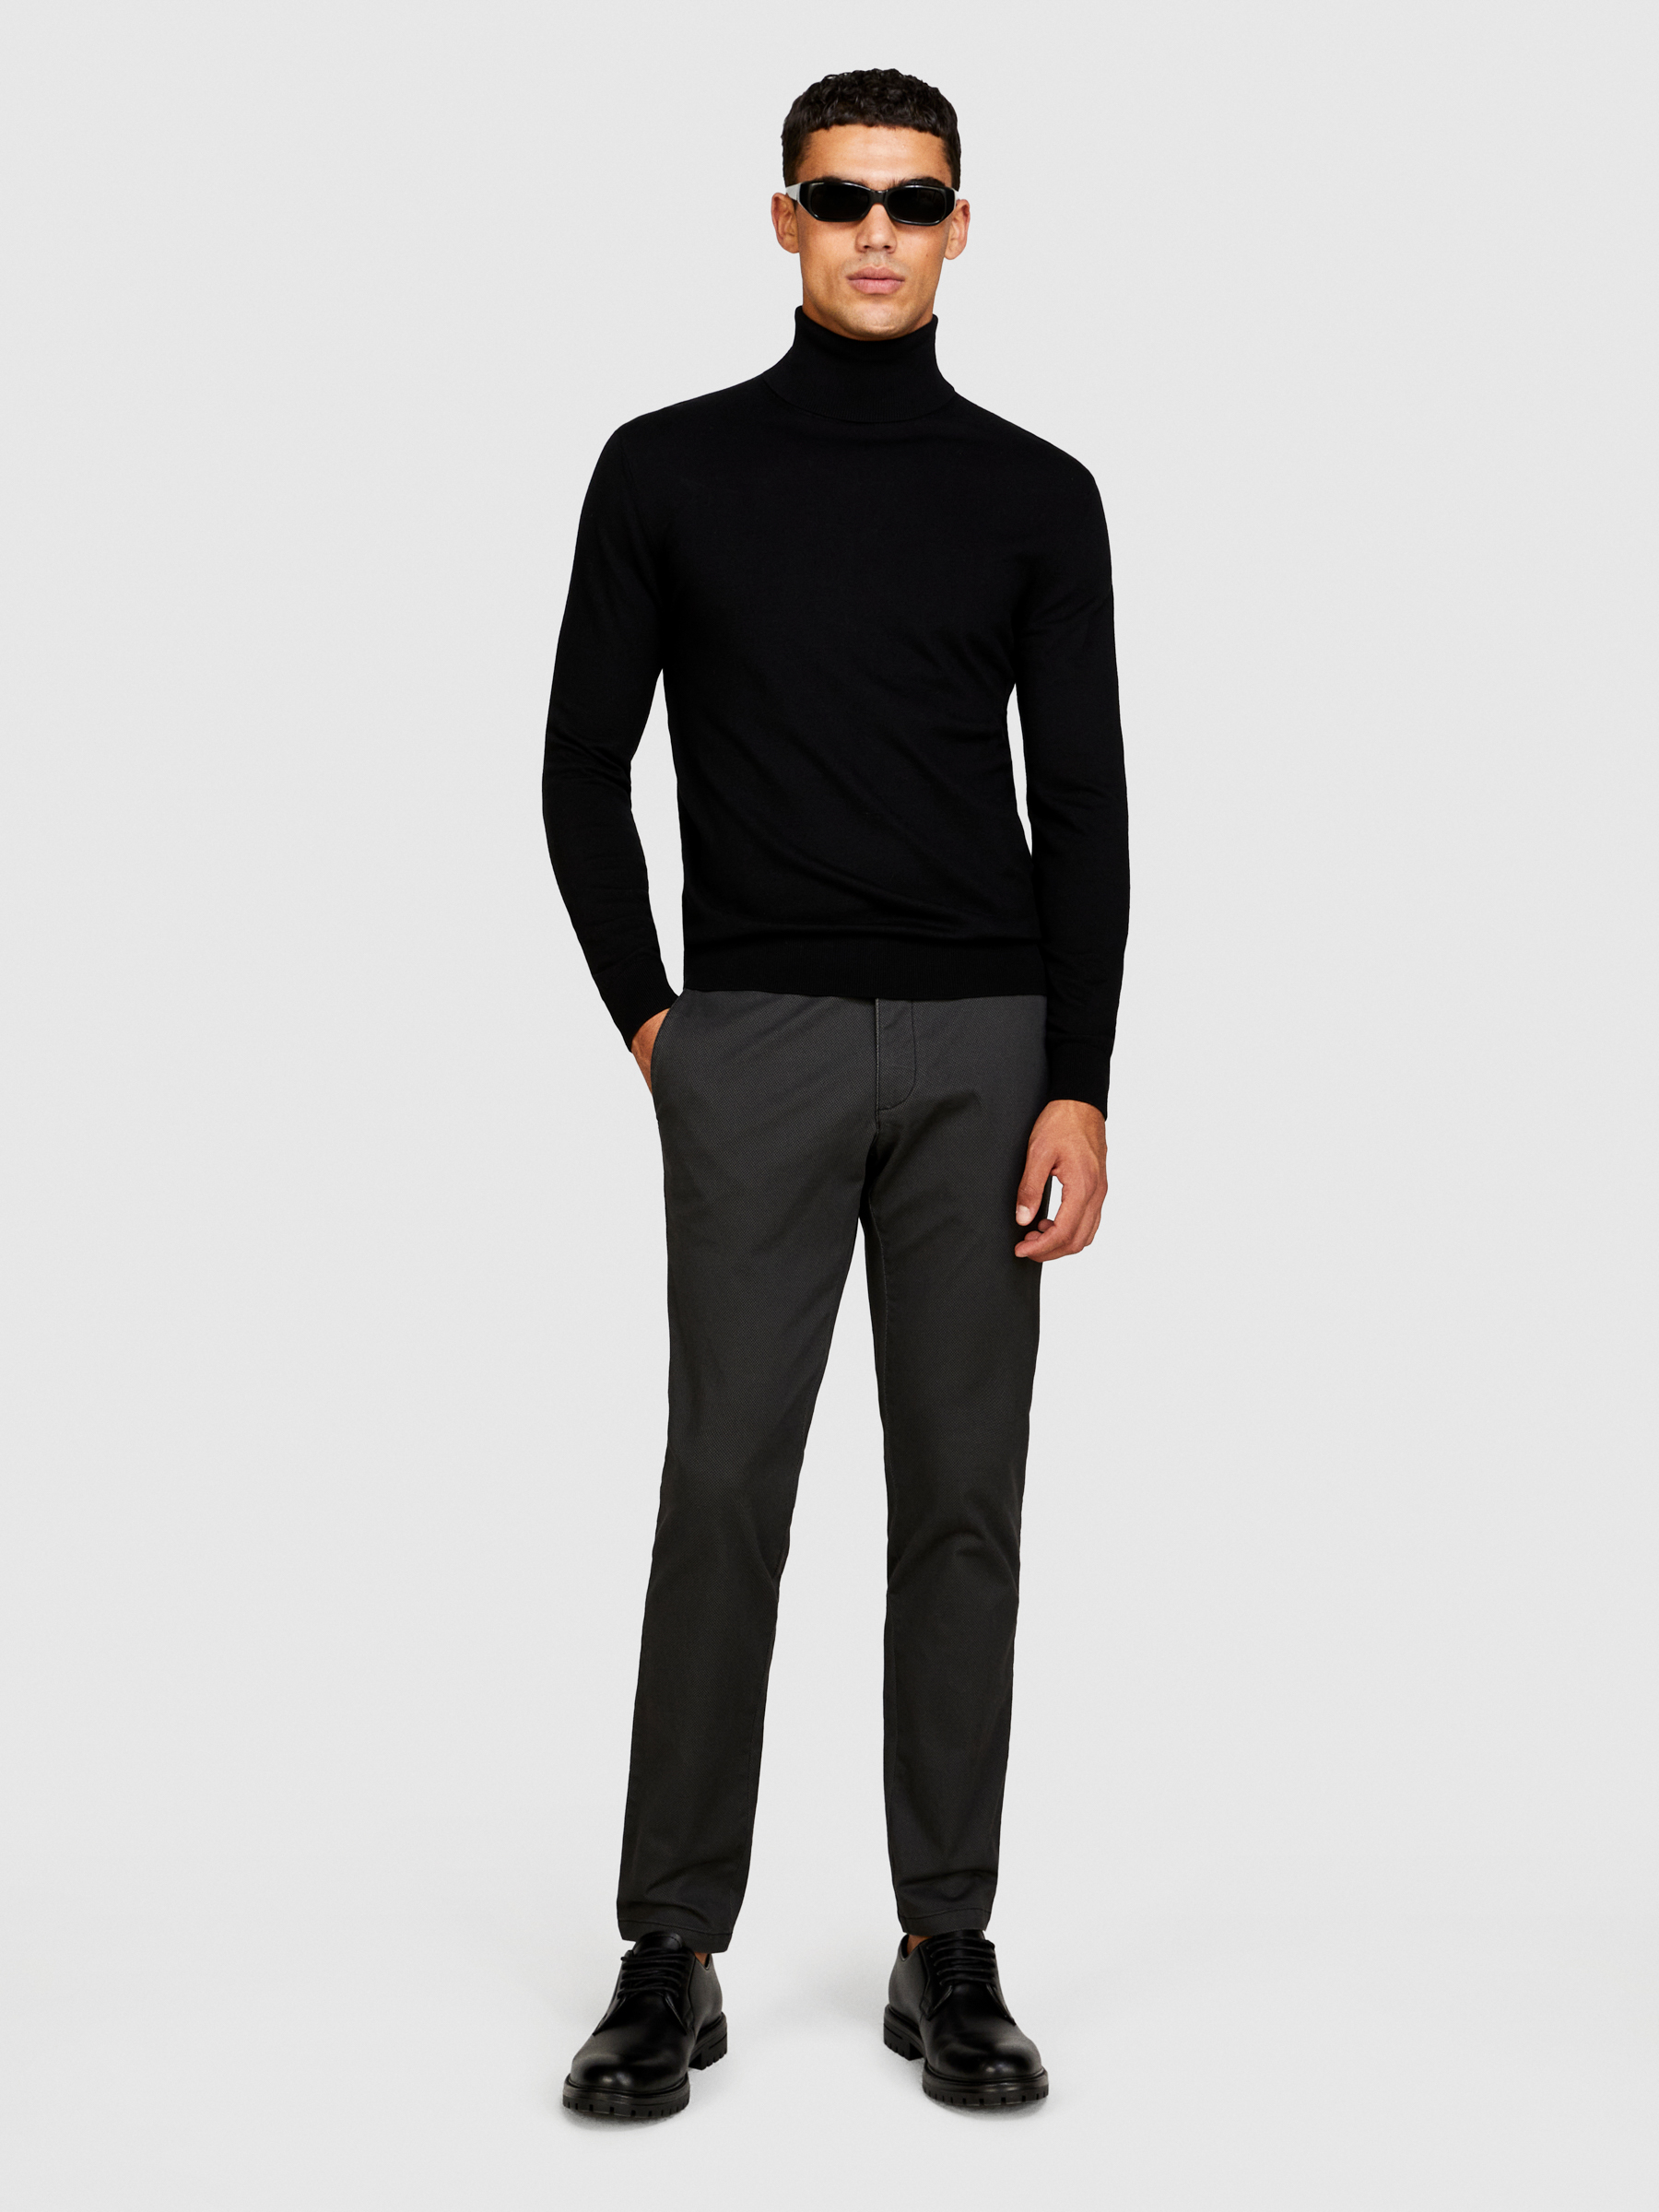 Sisley - Solid Colored Sweater With High Collar, Man, Black, Size: S